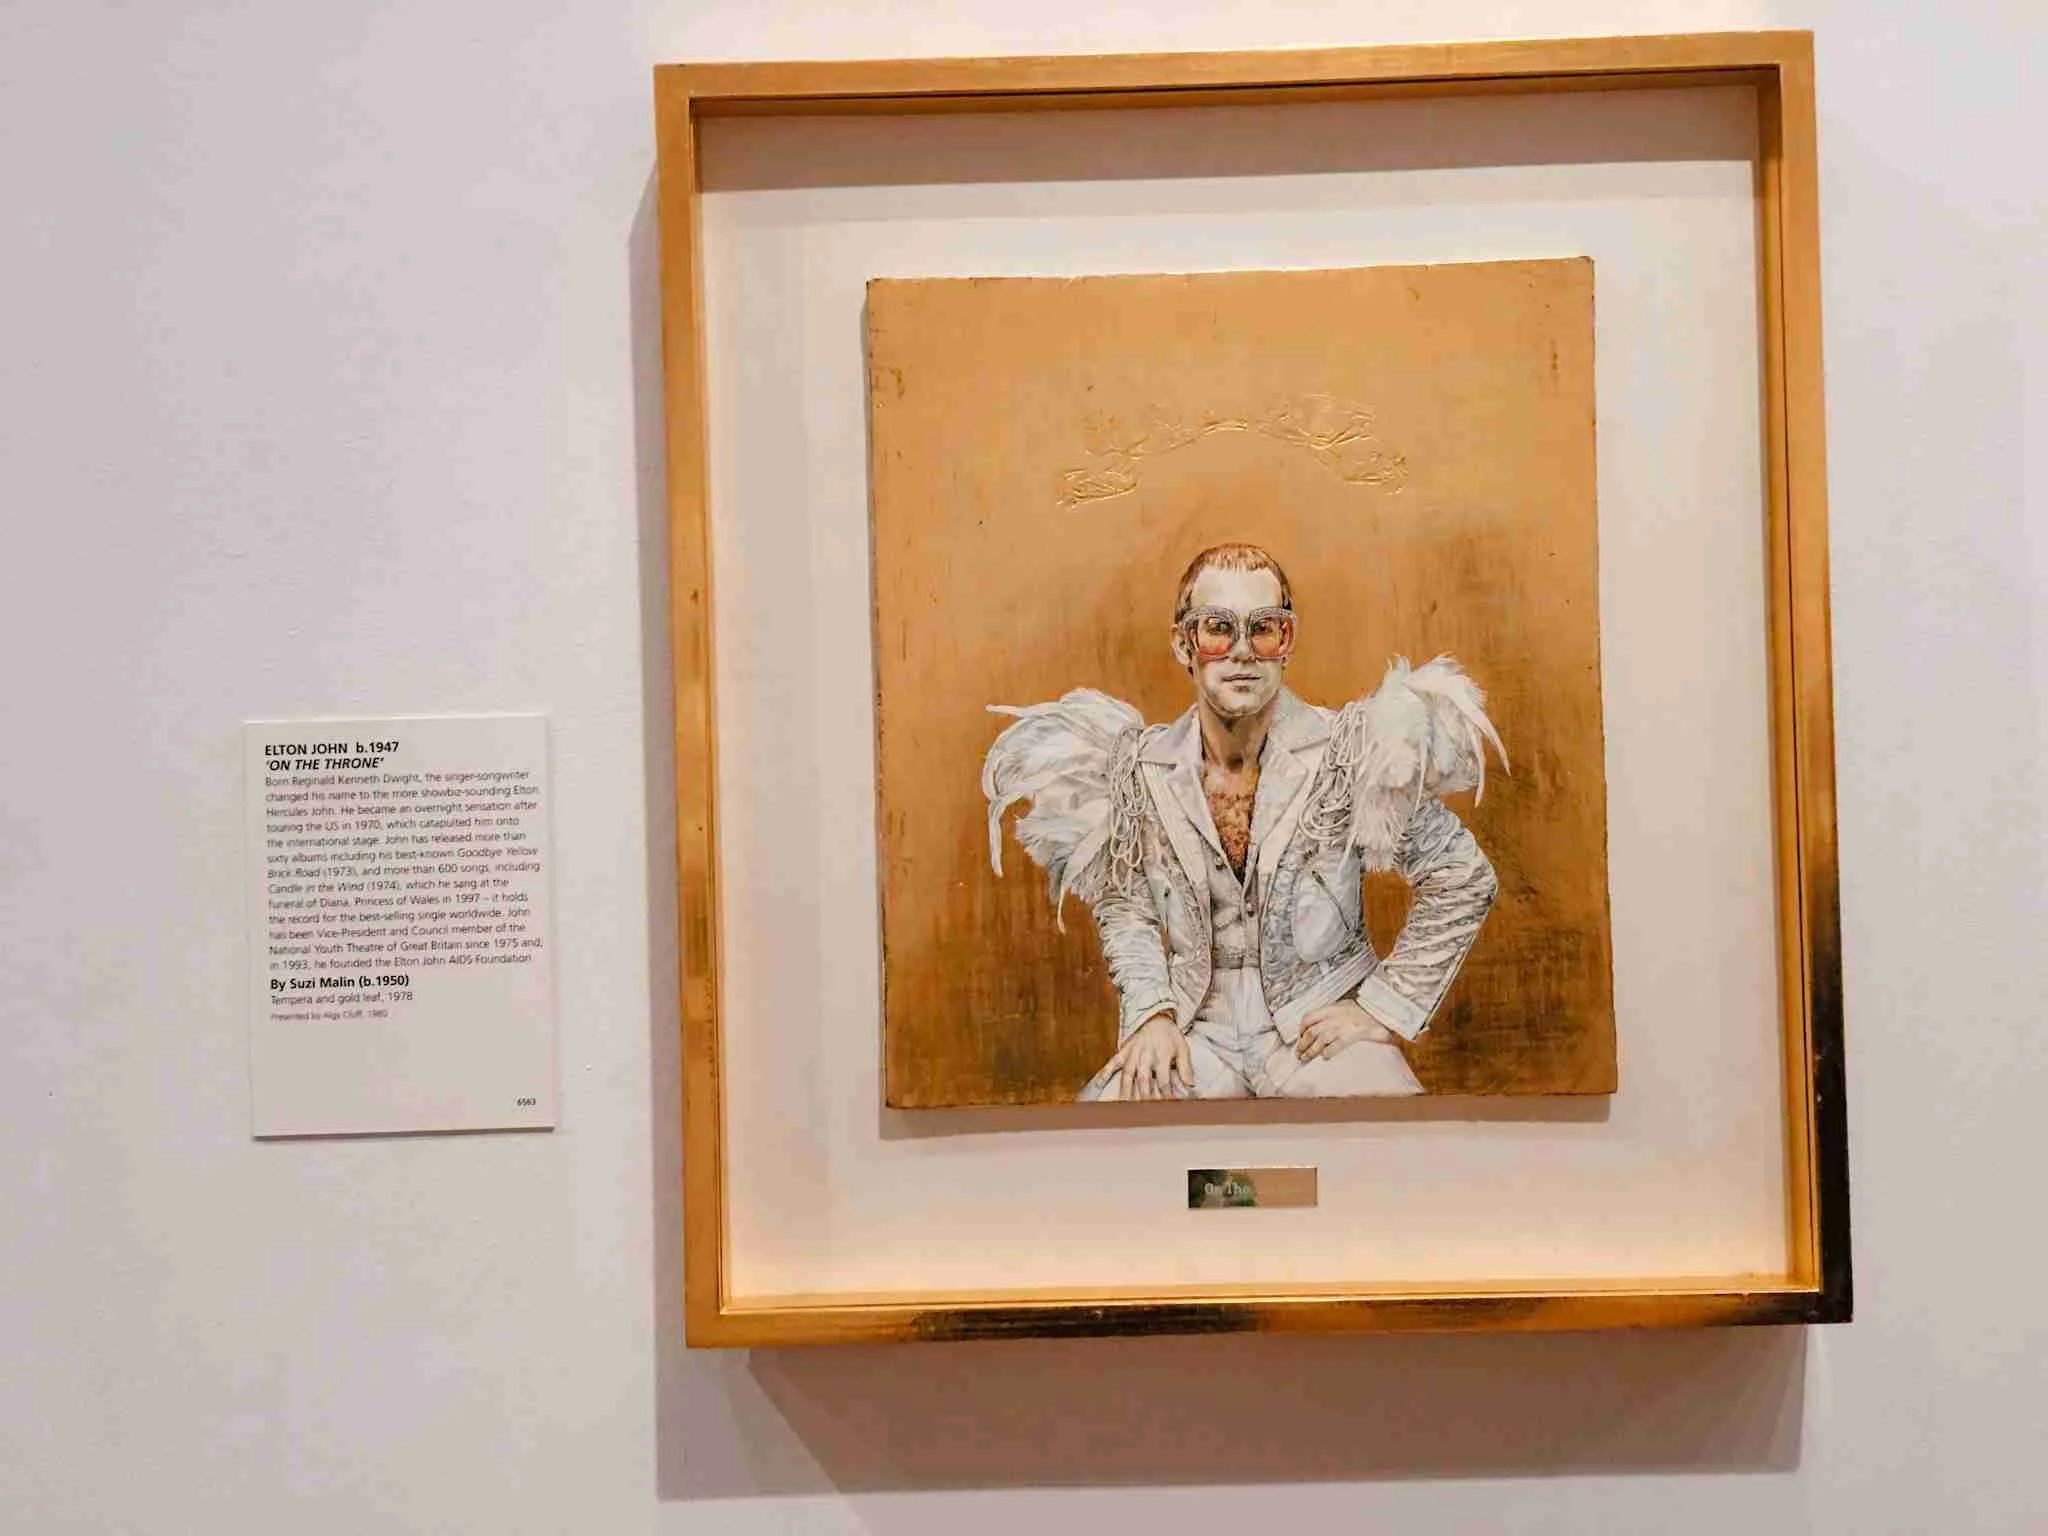 Elton John's Portrait in the National Portrait Gallery in London - my personal favourite of London's museums